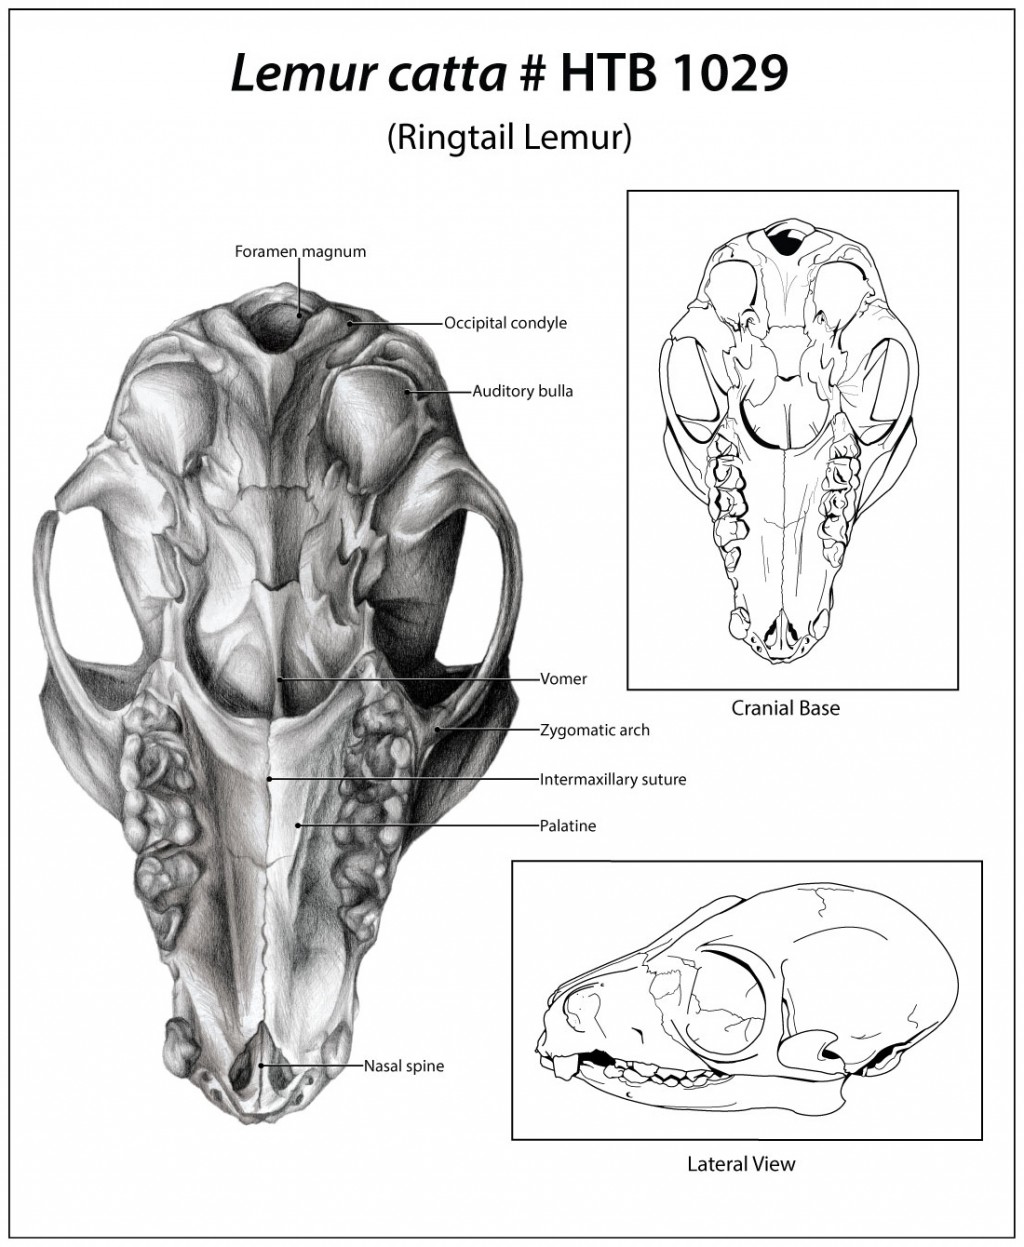 Black and white, graphite and line art drawings of a ringtail lemur skill. Cranial base labeled, and a lateral view inset with lower jaw.